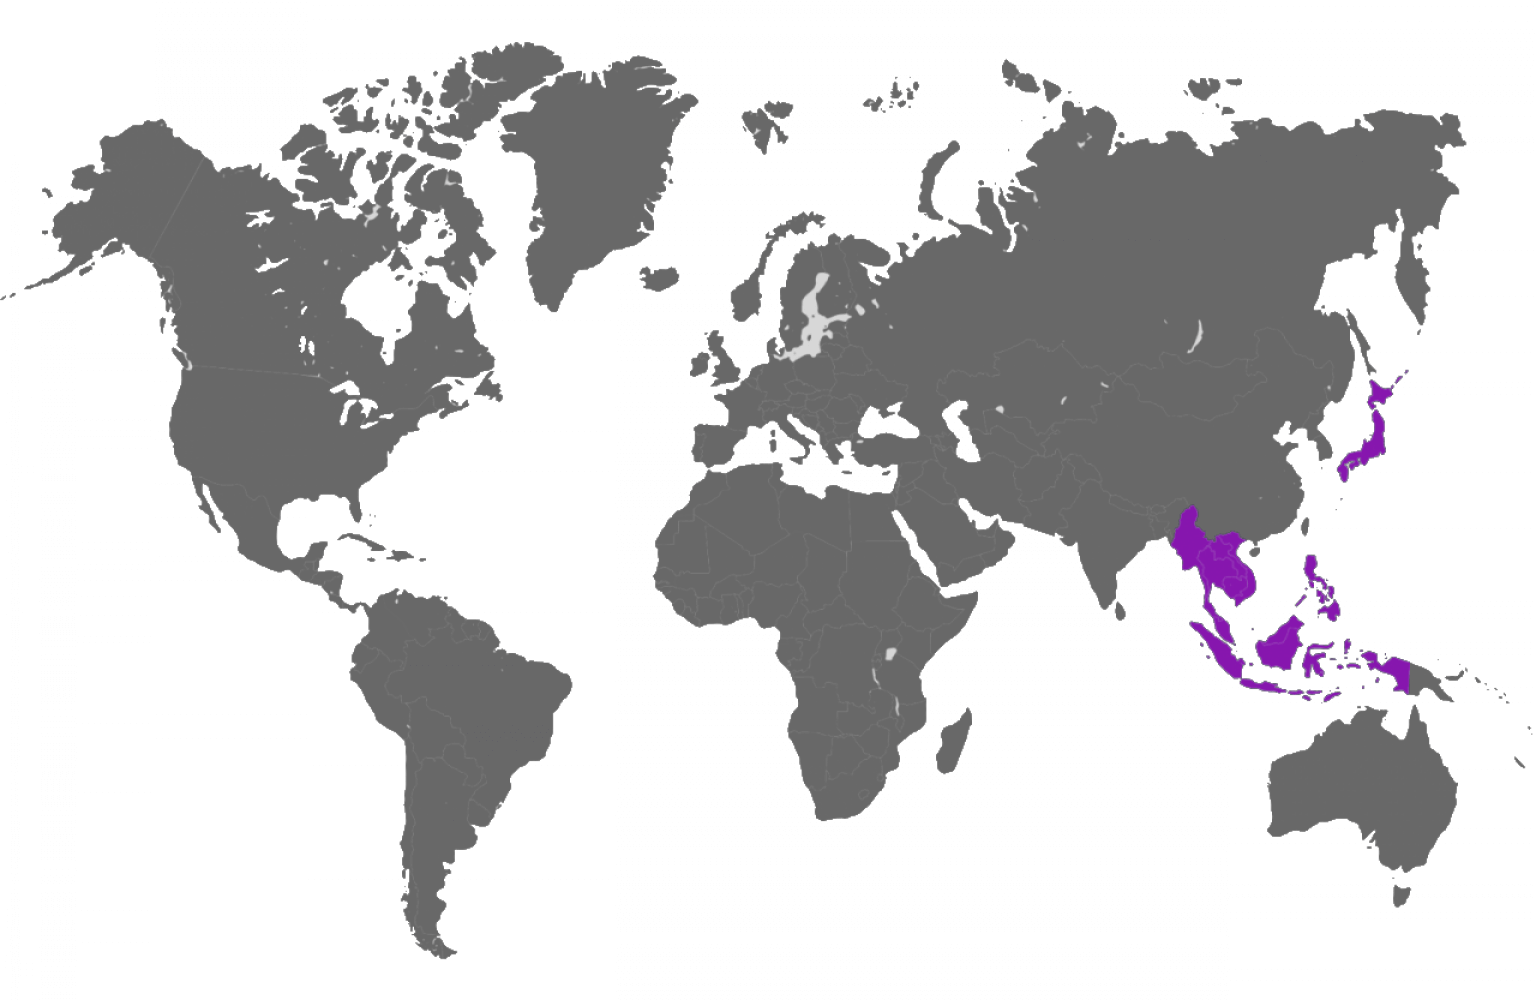 Map Image of South East Asia Region for i4T Global Licence Holders